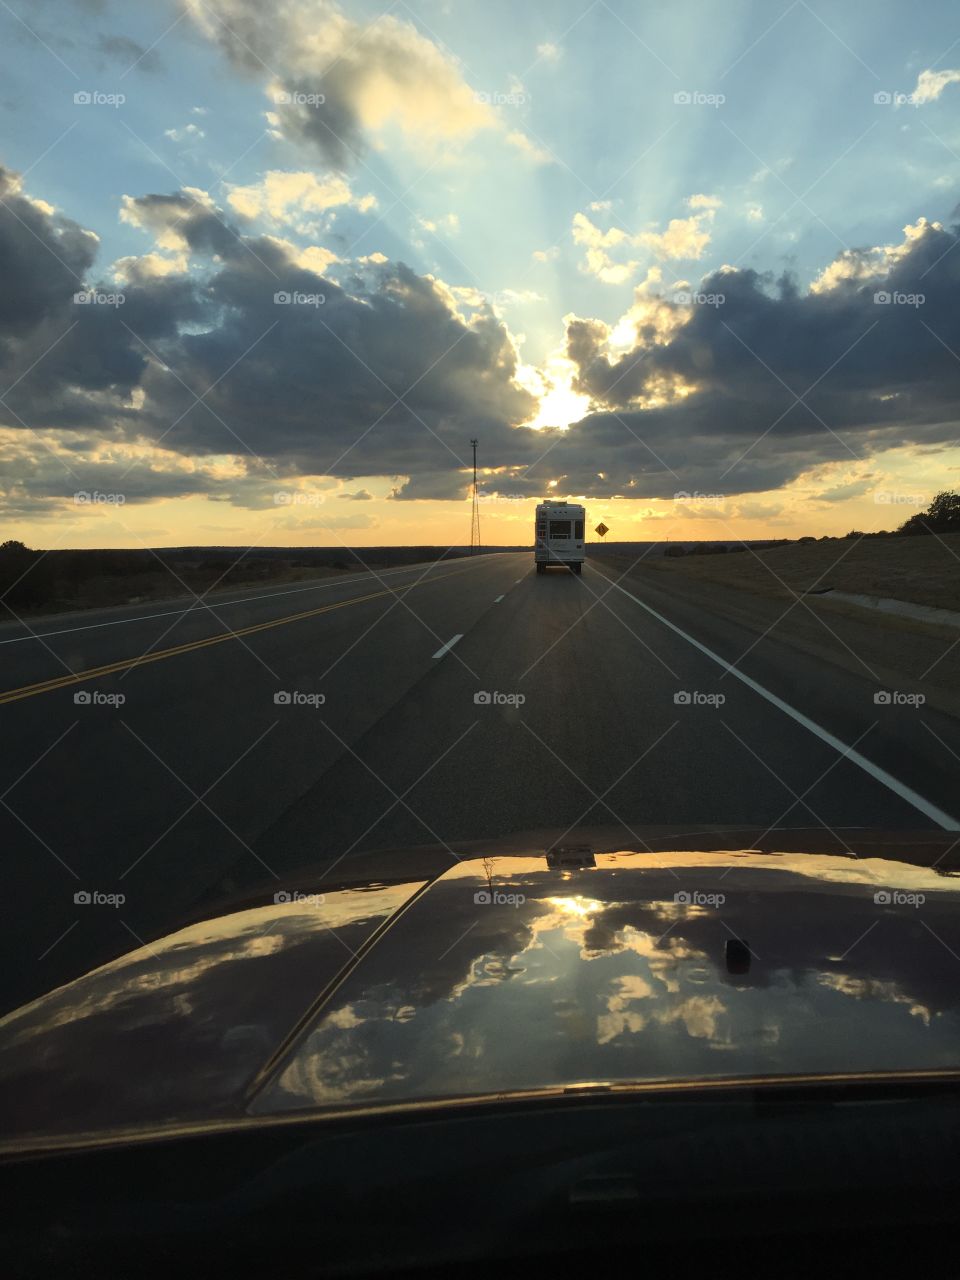 Traveling down the road at sunset on the next adventure following an RV on open highways. The sky welcomes what comes next. 